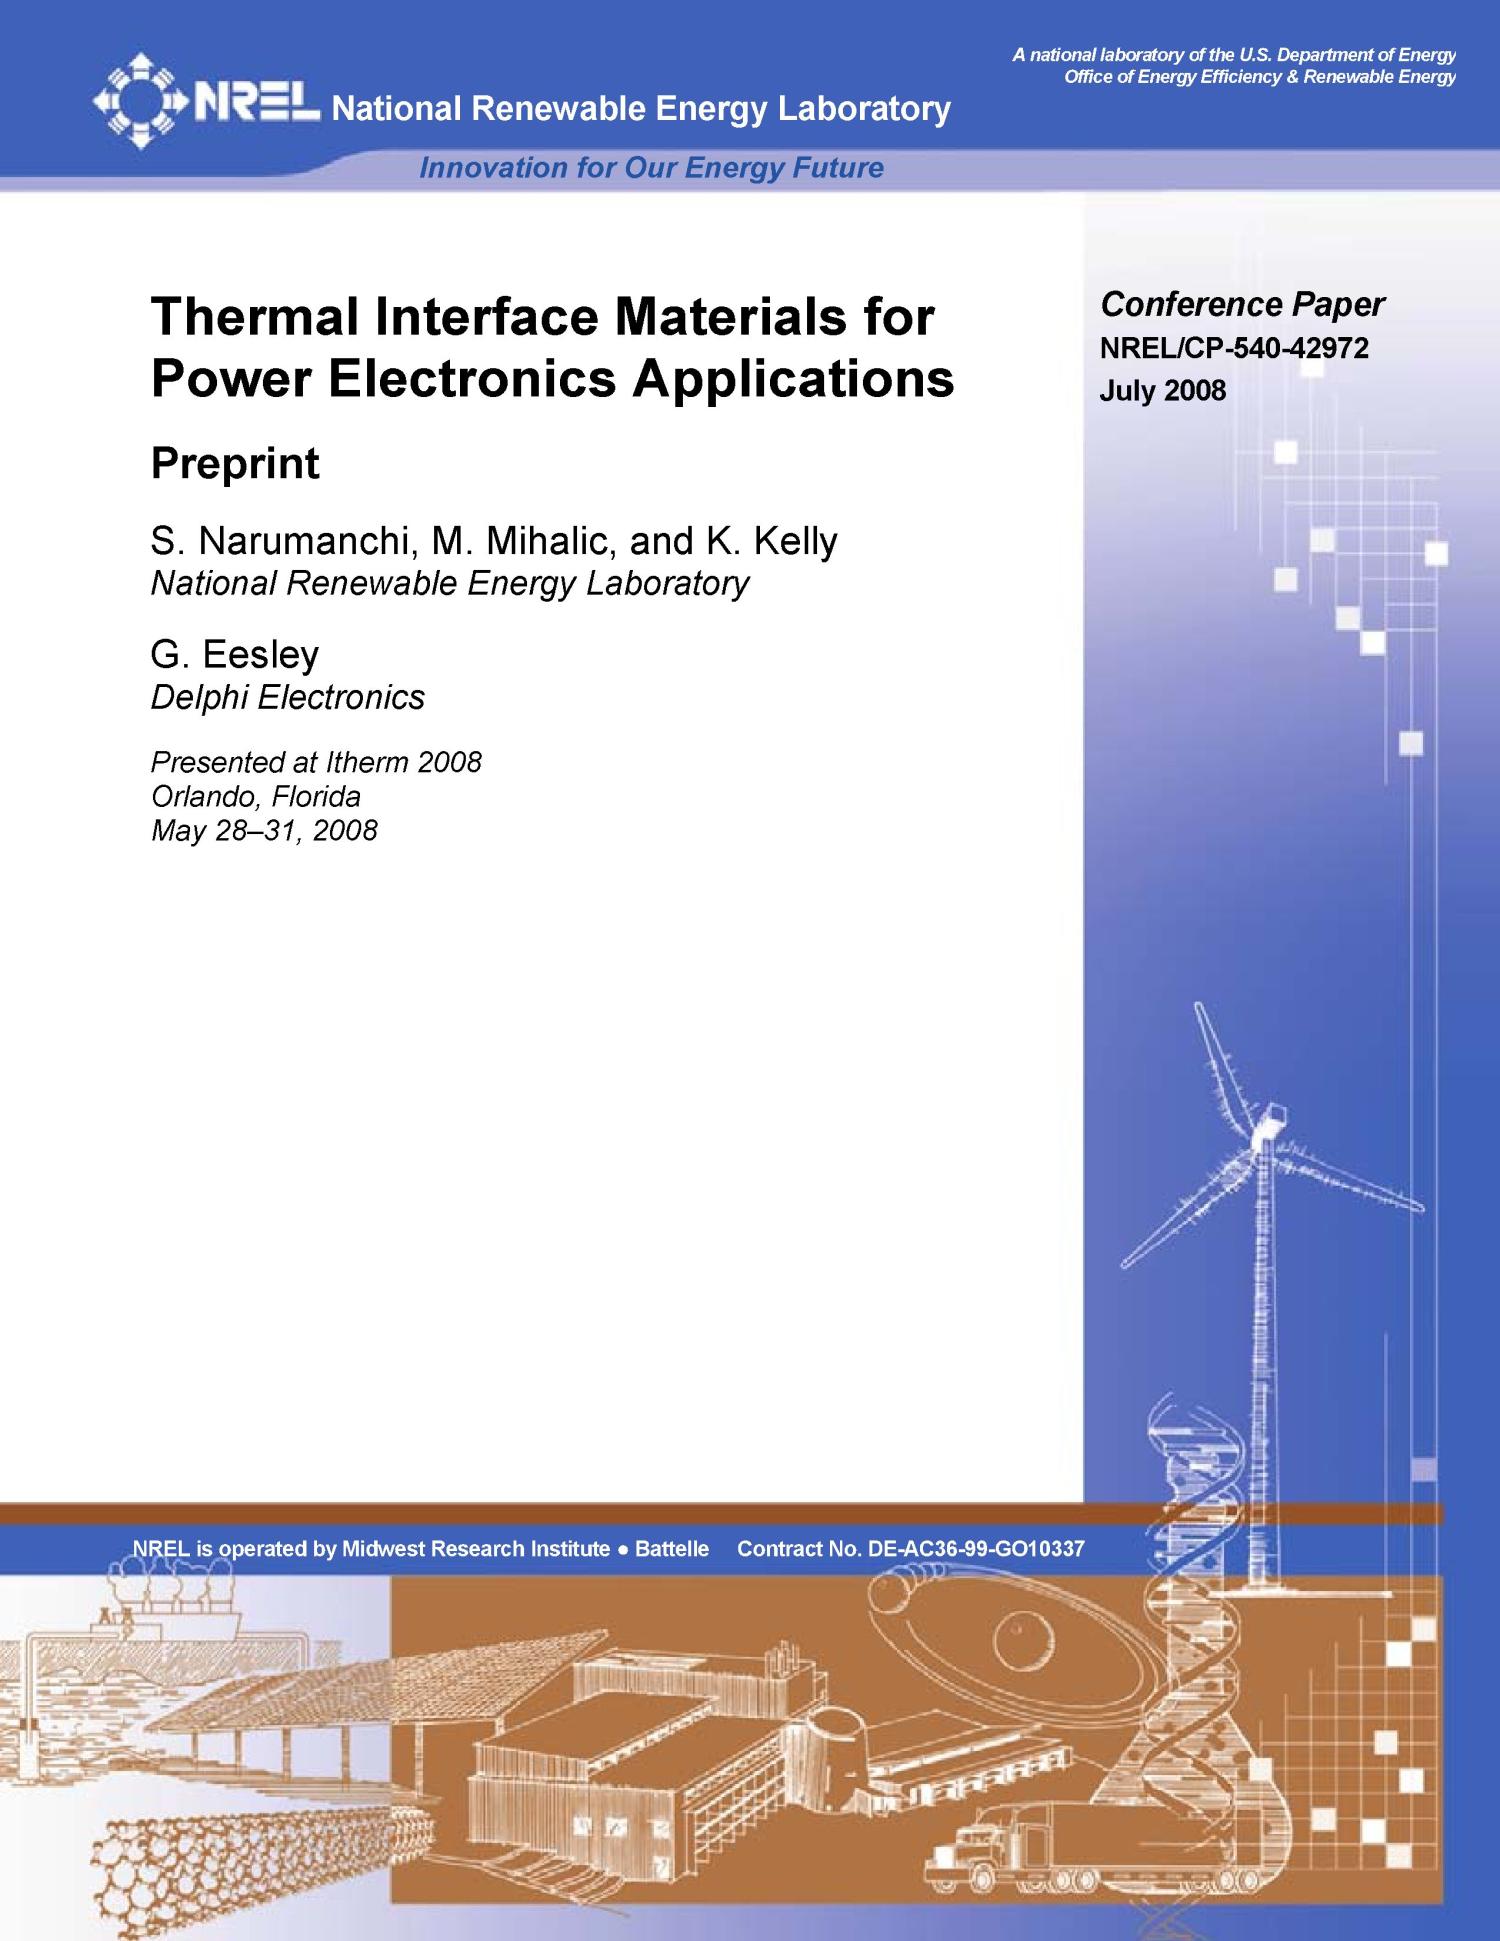 Thermal Interface Materials for Power Electronics Applications: Preprint
                                                
                                                    [Sequence #]: 1 of 13
                                                